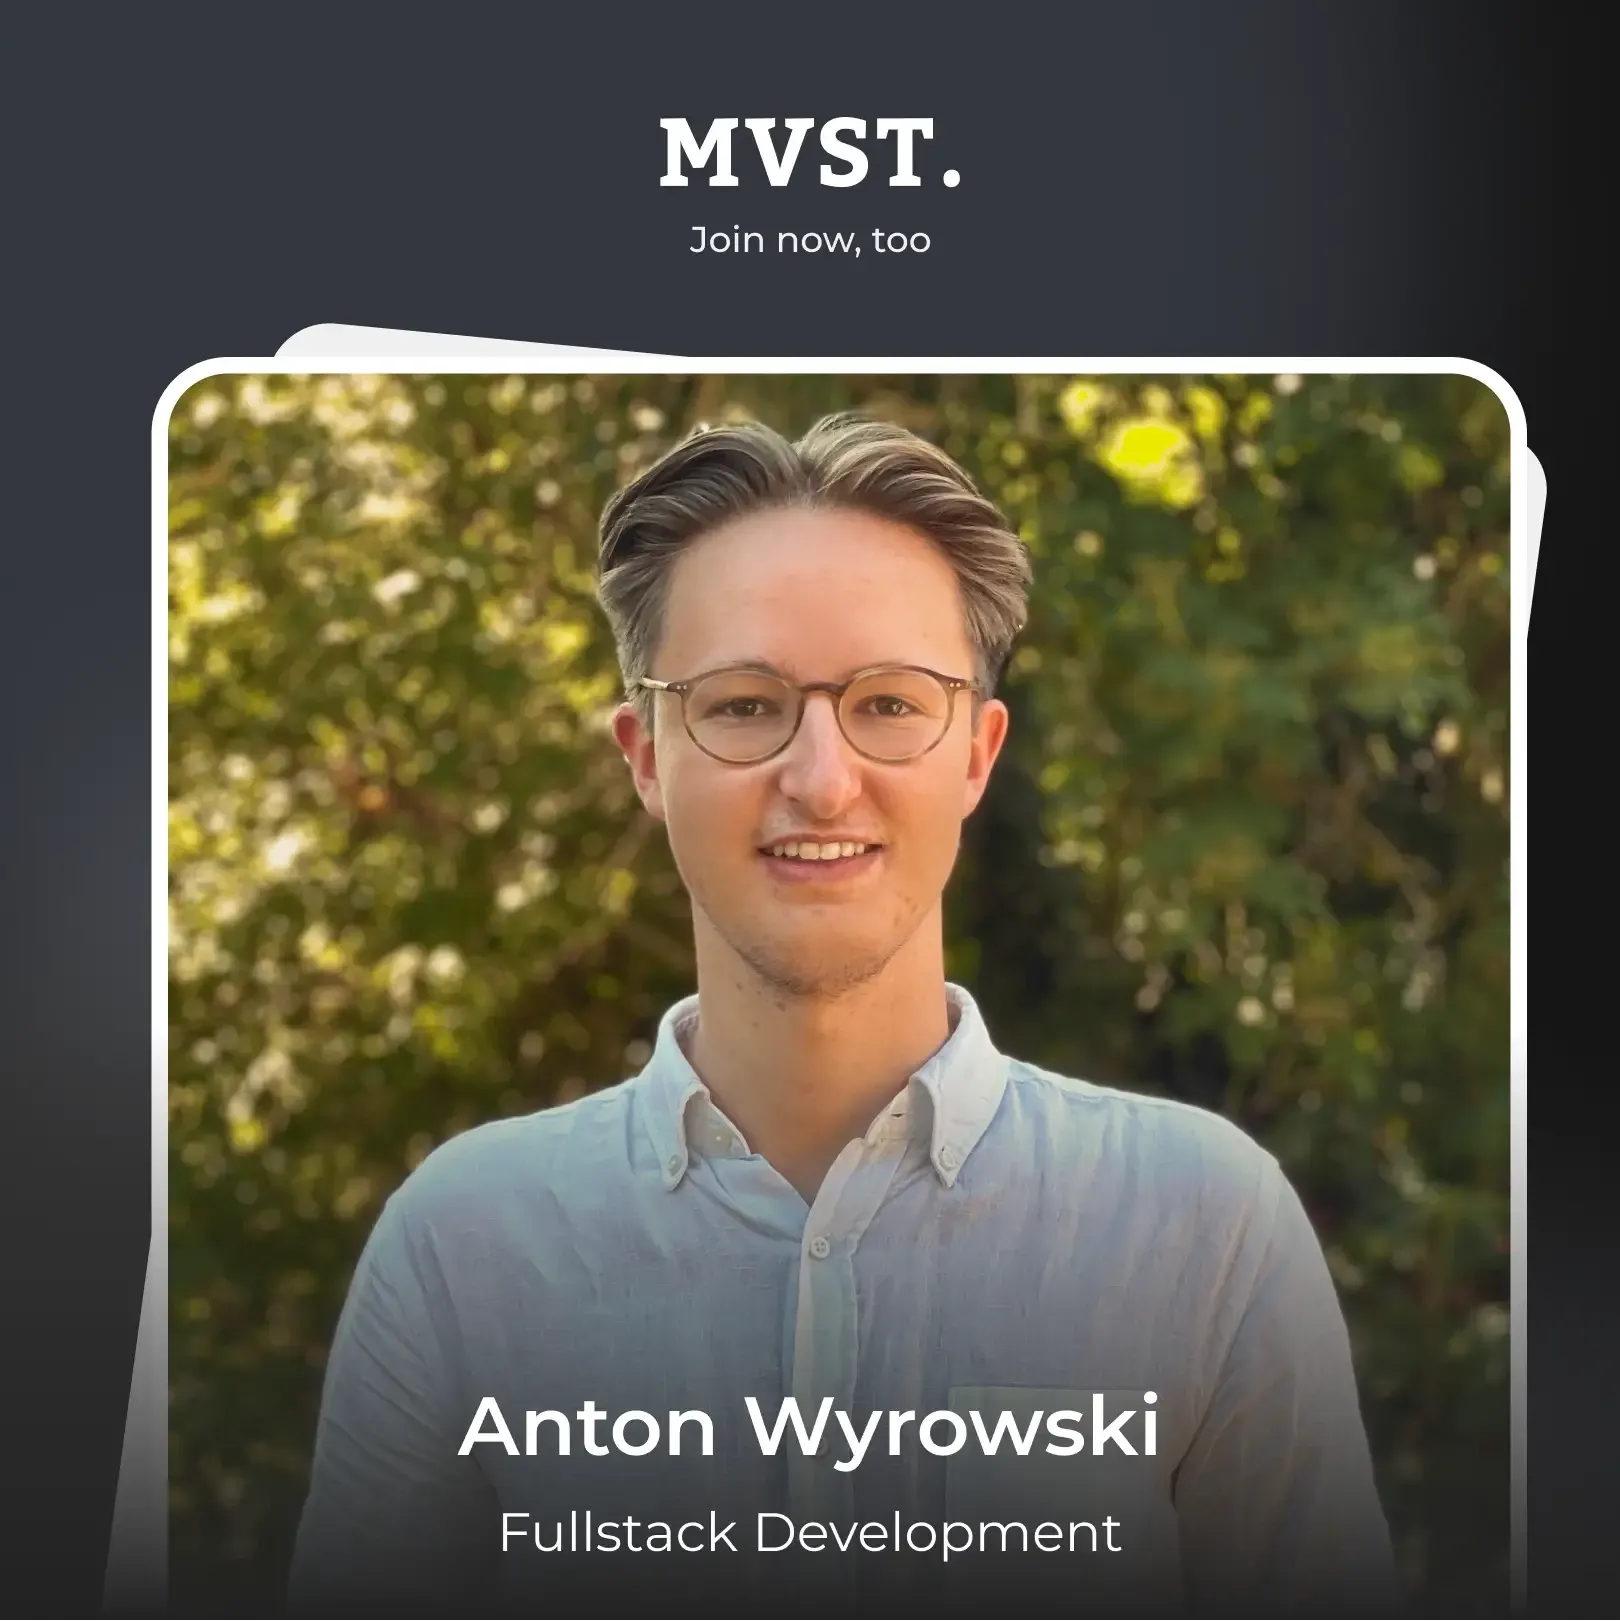 Welcome to MVST, Anton!